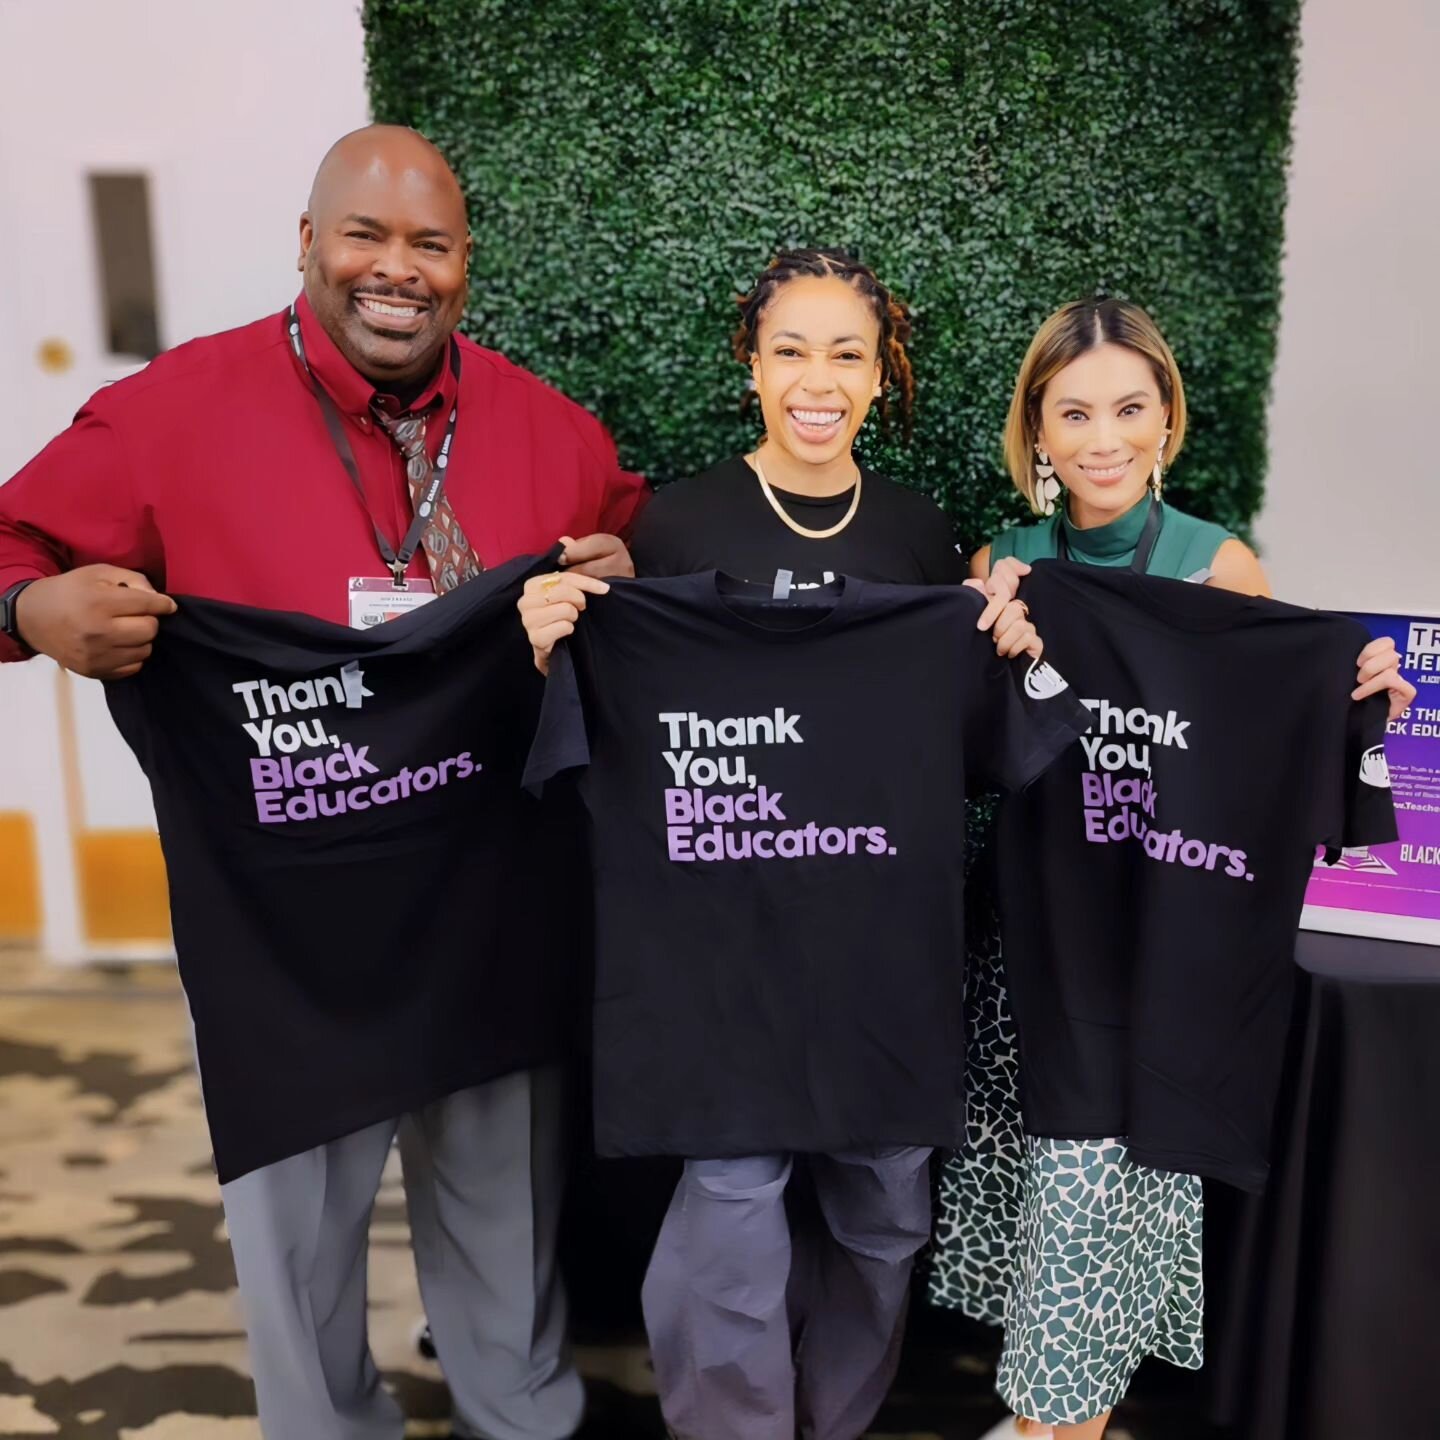 Thank you, Black Educators! And thank you @blackfemaleproject for our powerful and empowering shirts! Are you following the @blackfemaleproject yet?